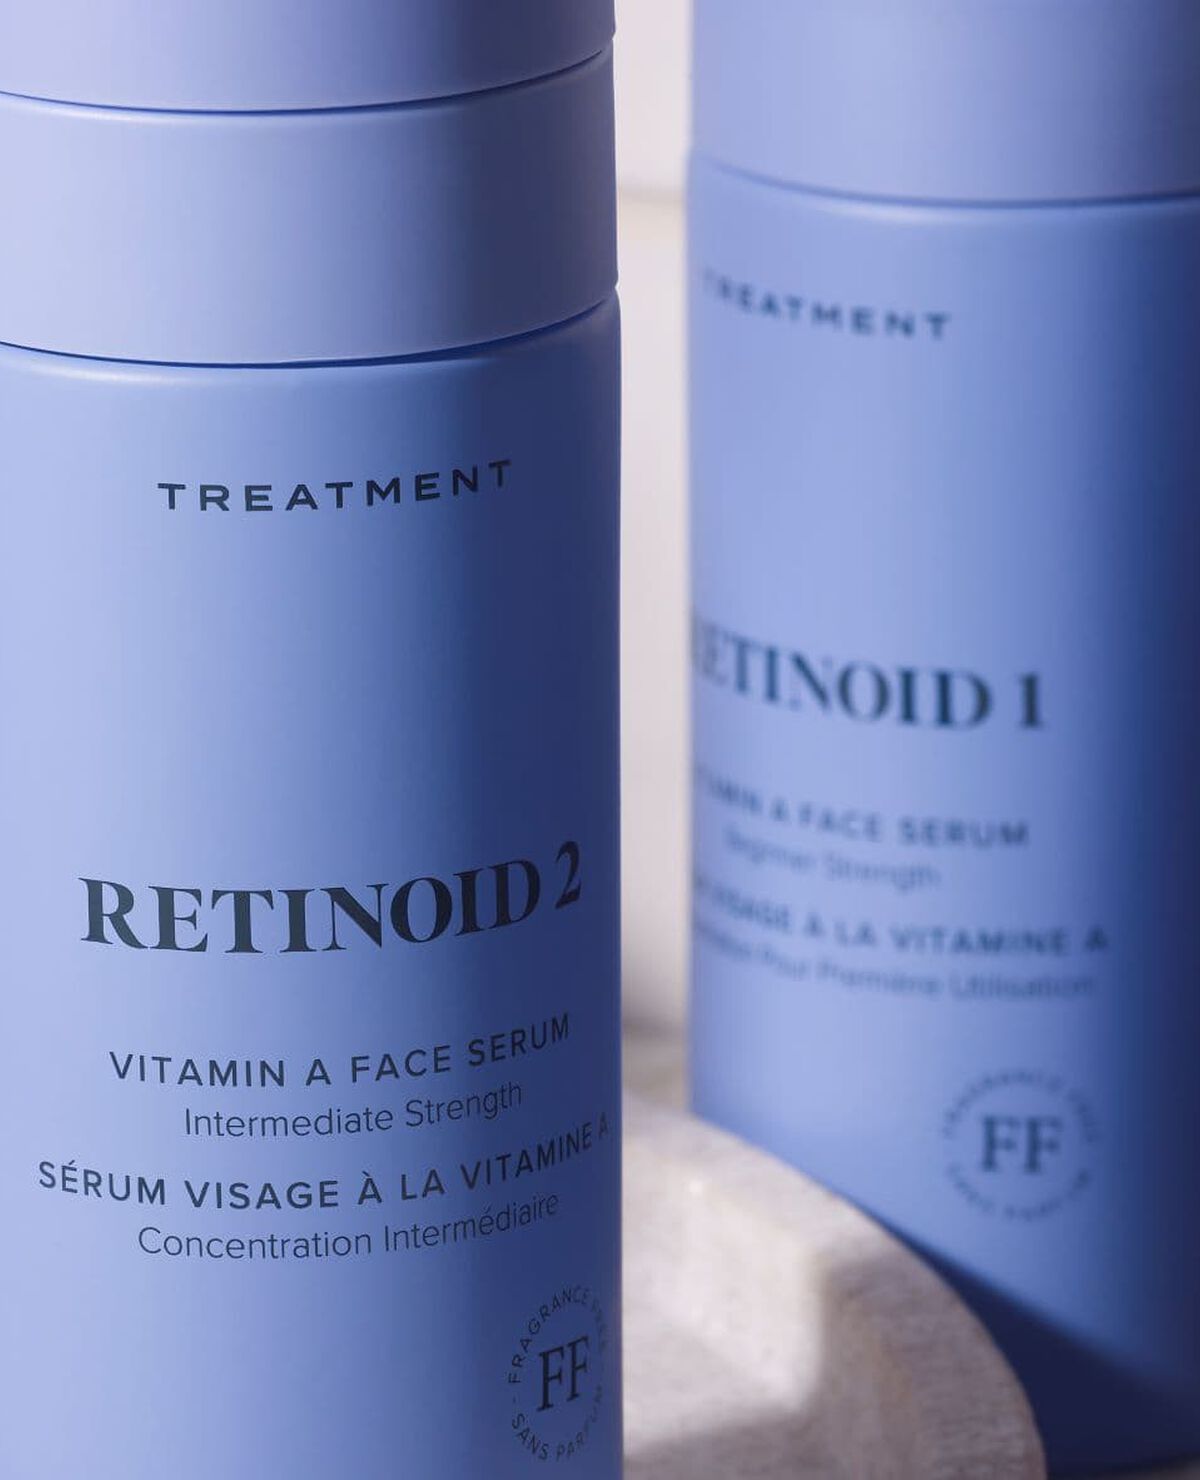 MOST WANTED | An Honest Review Of Caroline Hirons' Retinoid 2 Serum Review